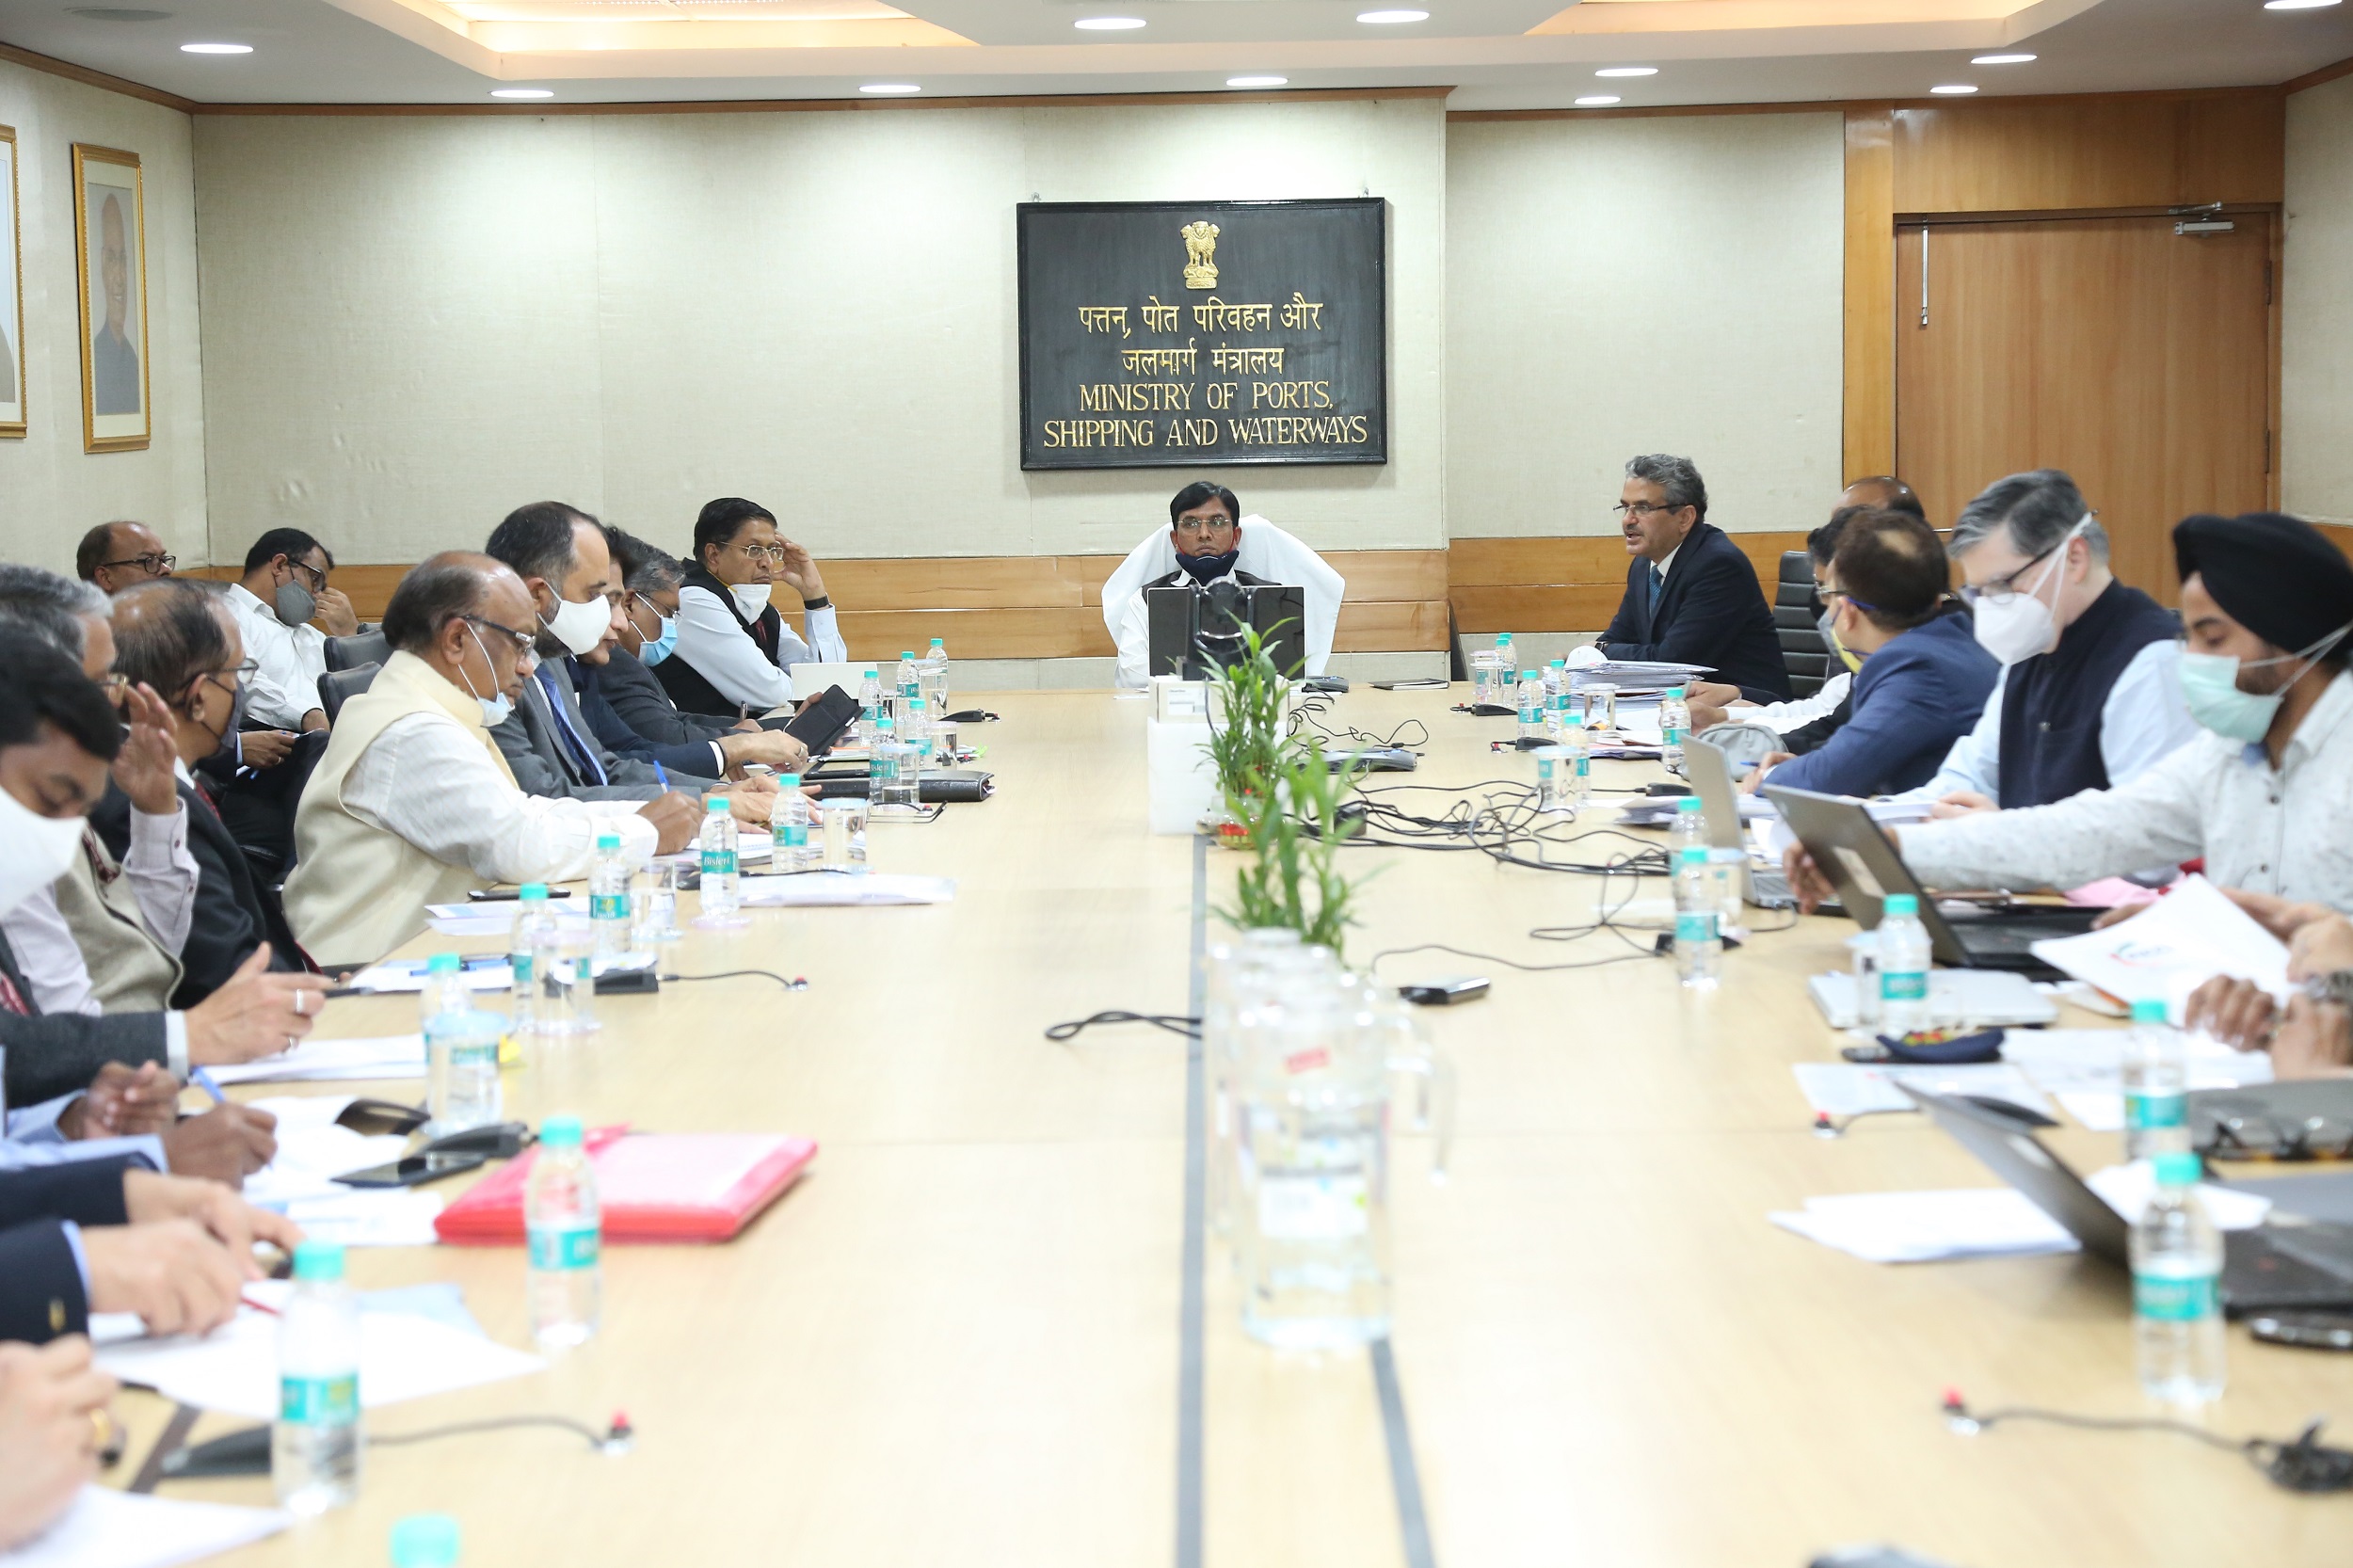 Ministry of Ports, Shipping and Waterways reviewed the preparations for upcoming Maritime India Summit 2021 decoding=